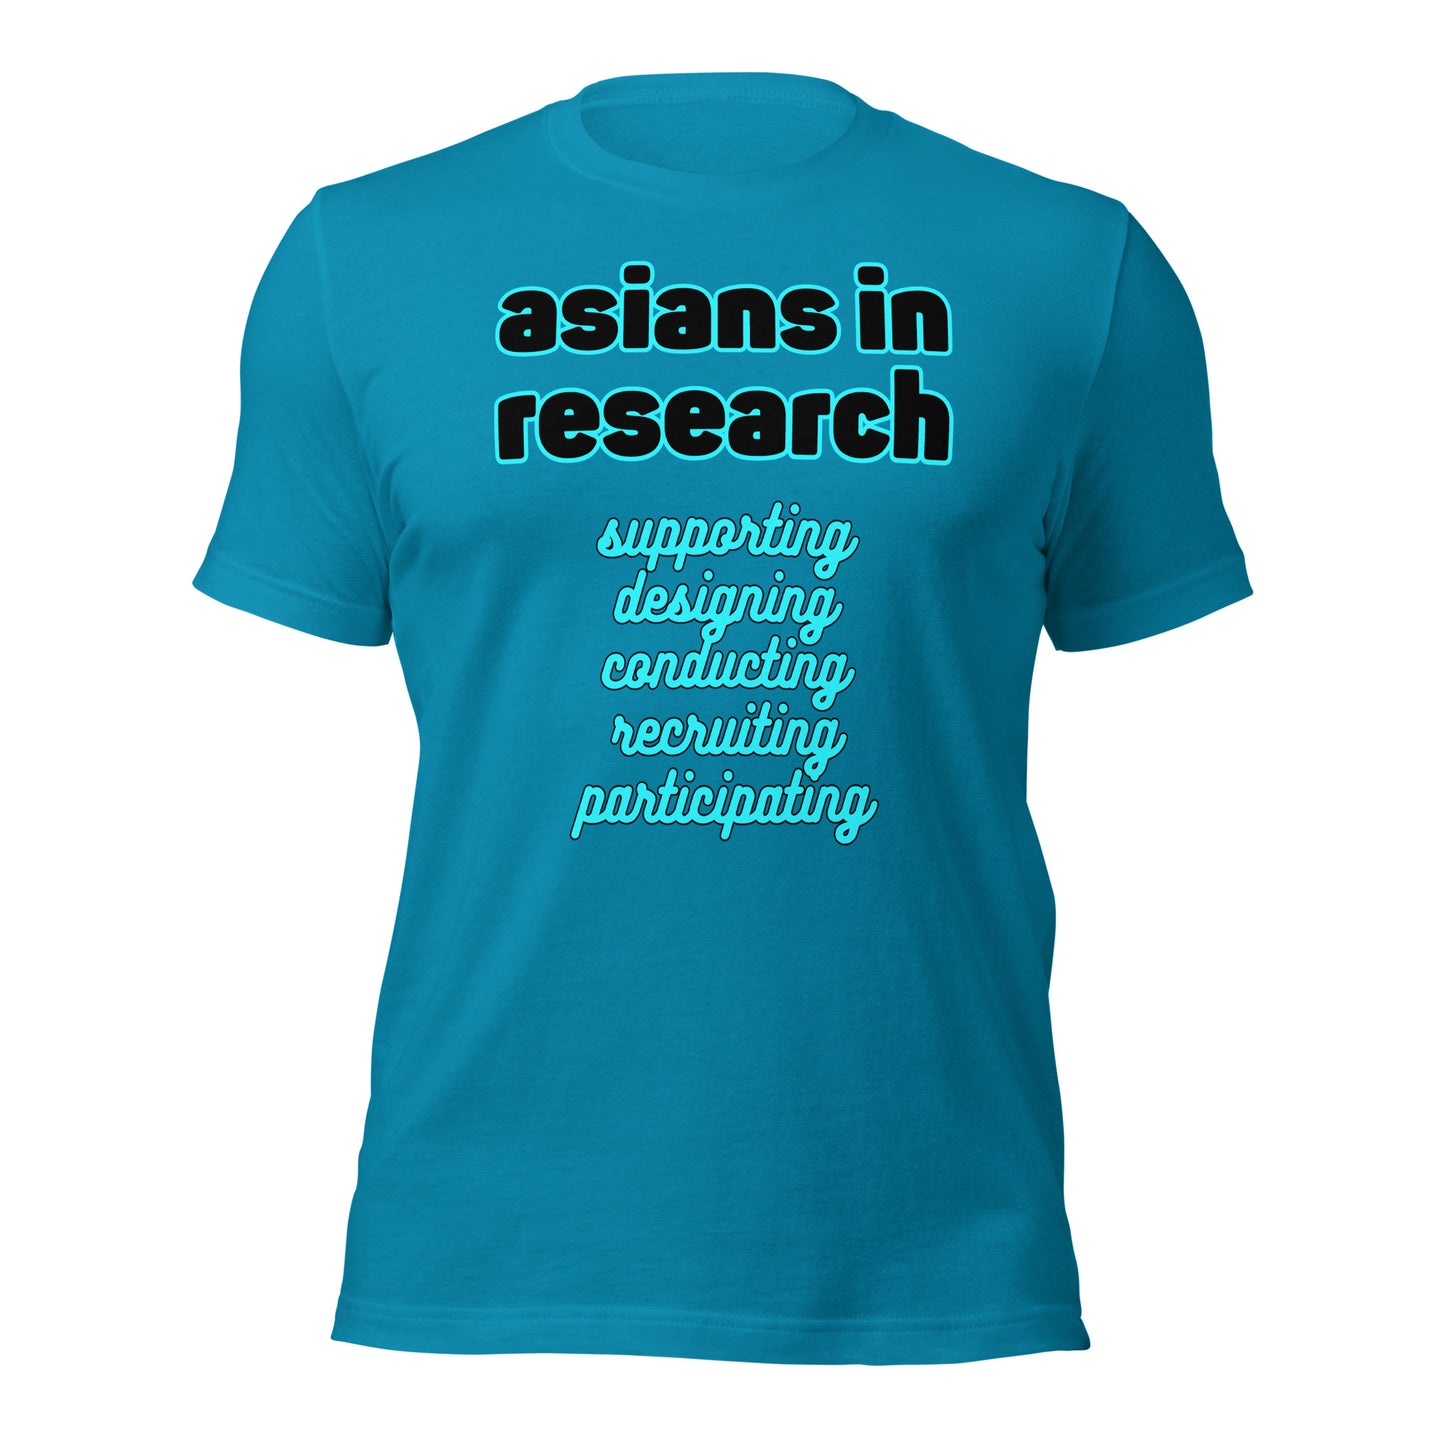 ASIANS in Research: Unisex t-shirt